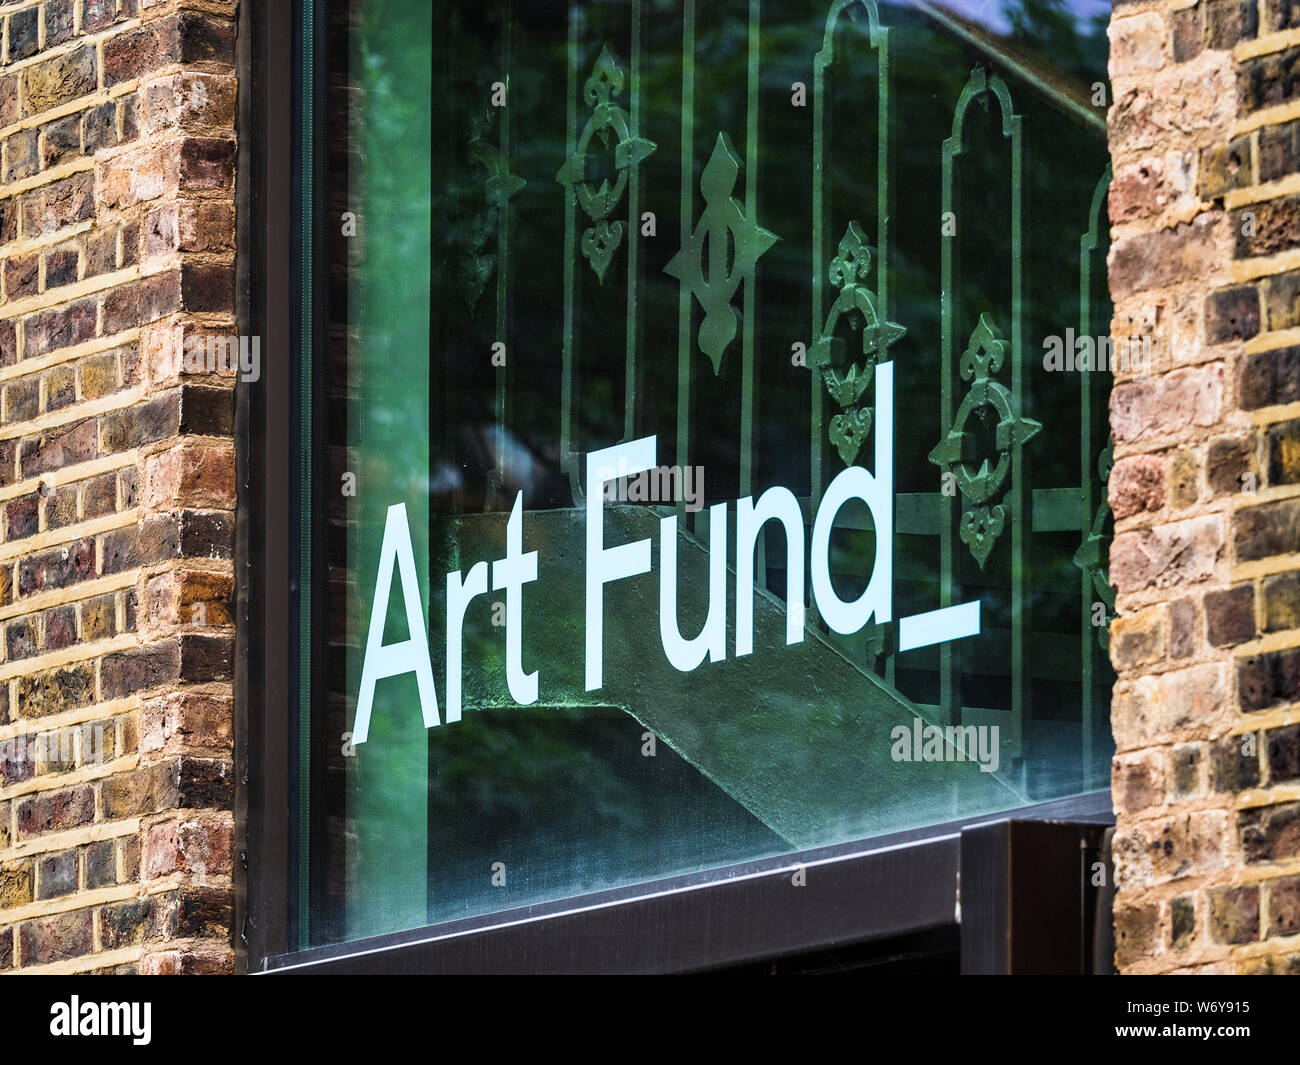 The Art Fund HQ or Art Fund Headquarters at 2 Granary Square King's Cross London. Founded in 1903 the fund helps museums and galleries by art. Stock Photo